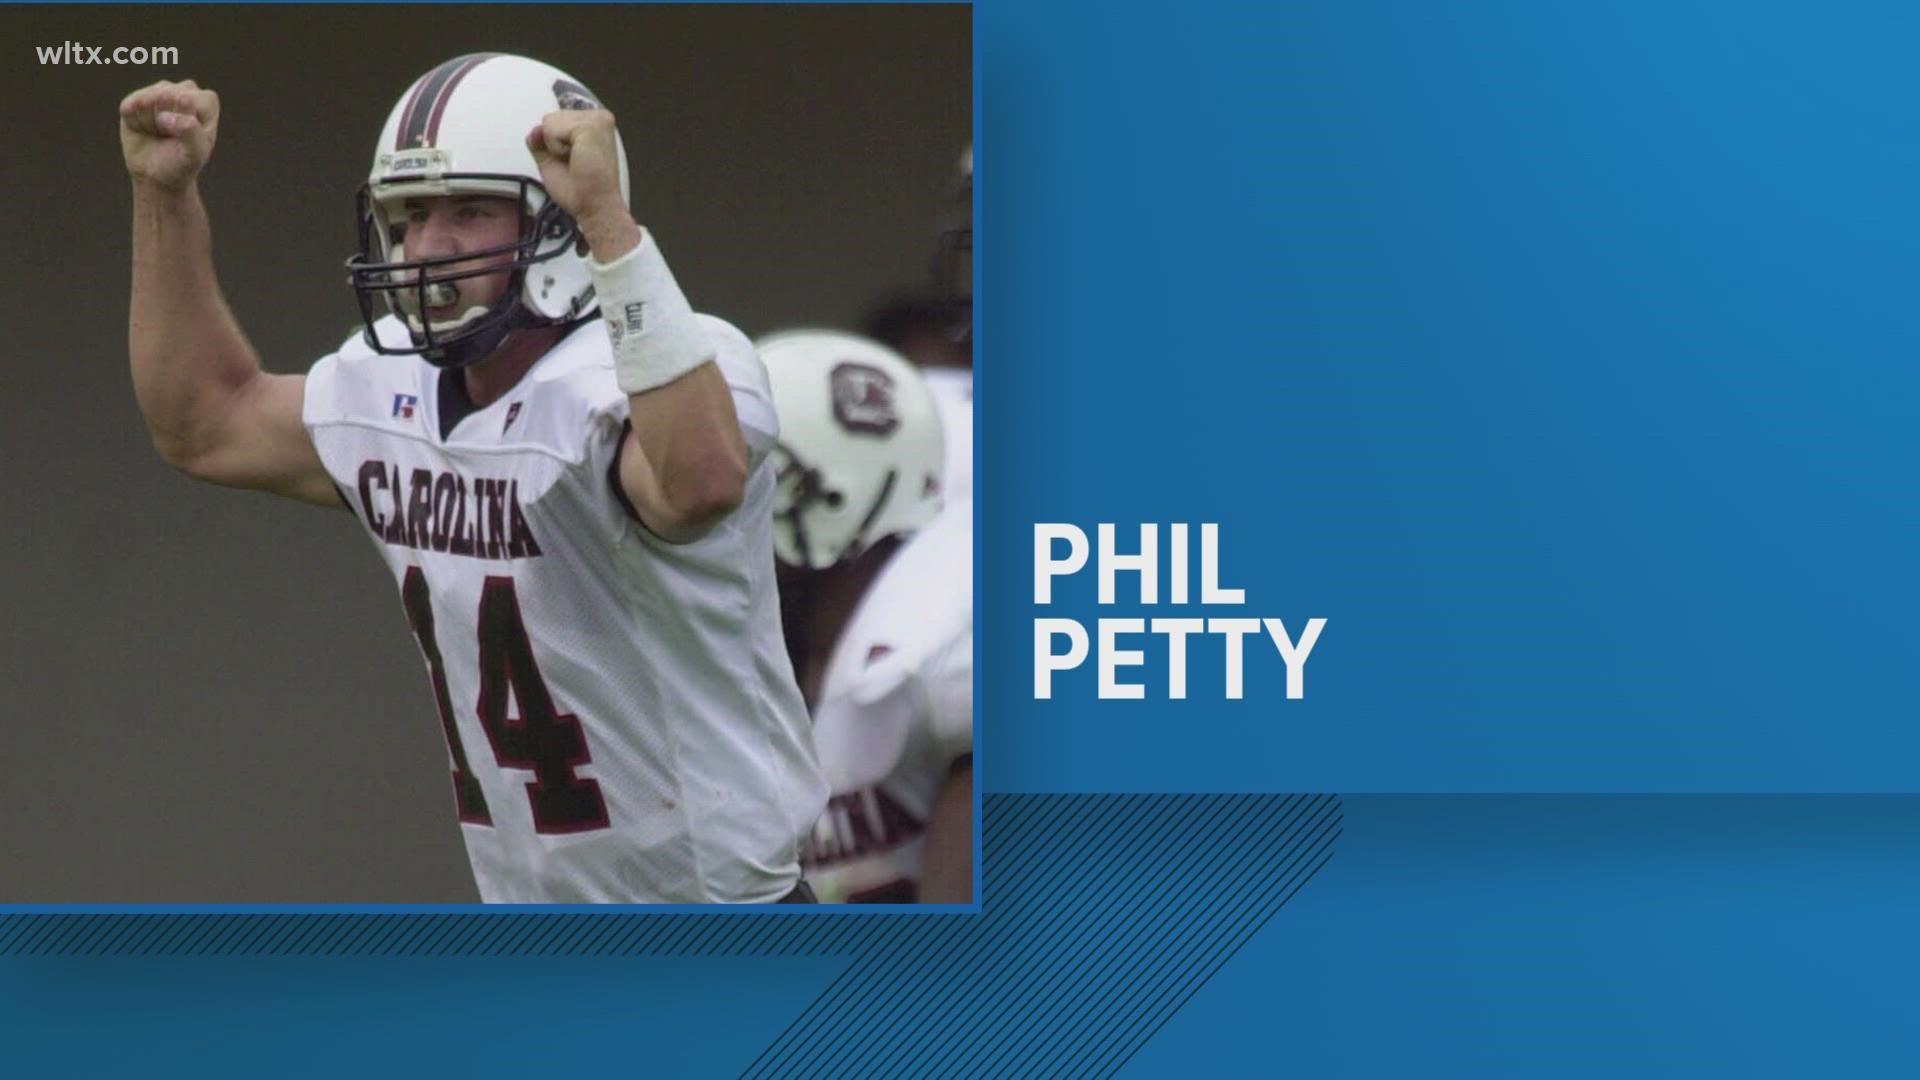 Former South Carolina Gamecocks quarterback Phil Petty, who led the Gamecocks to the best turnaround in NCAA history, has died.